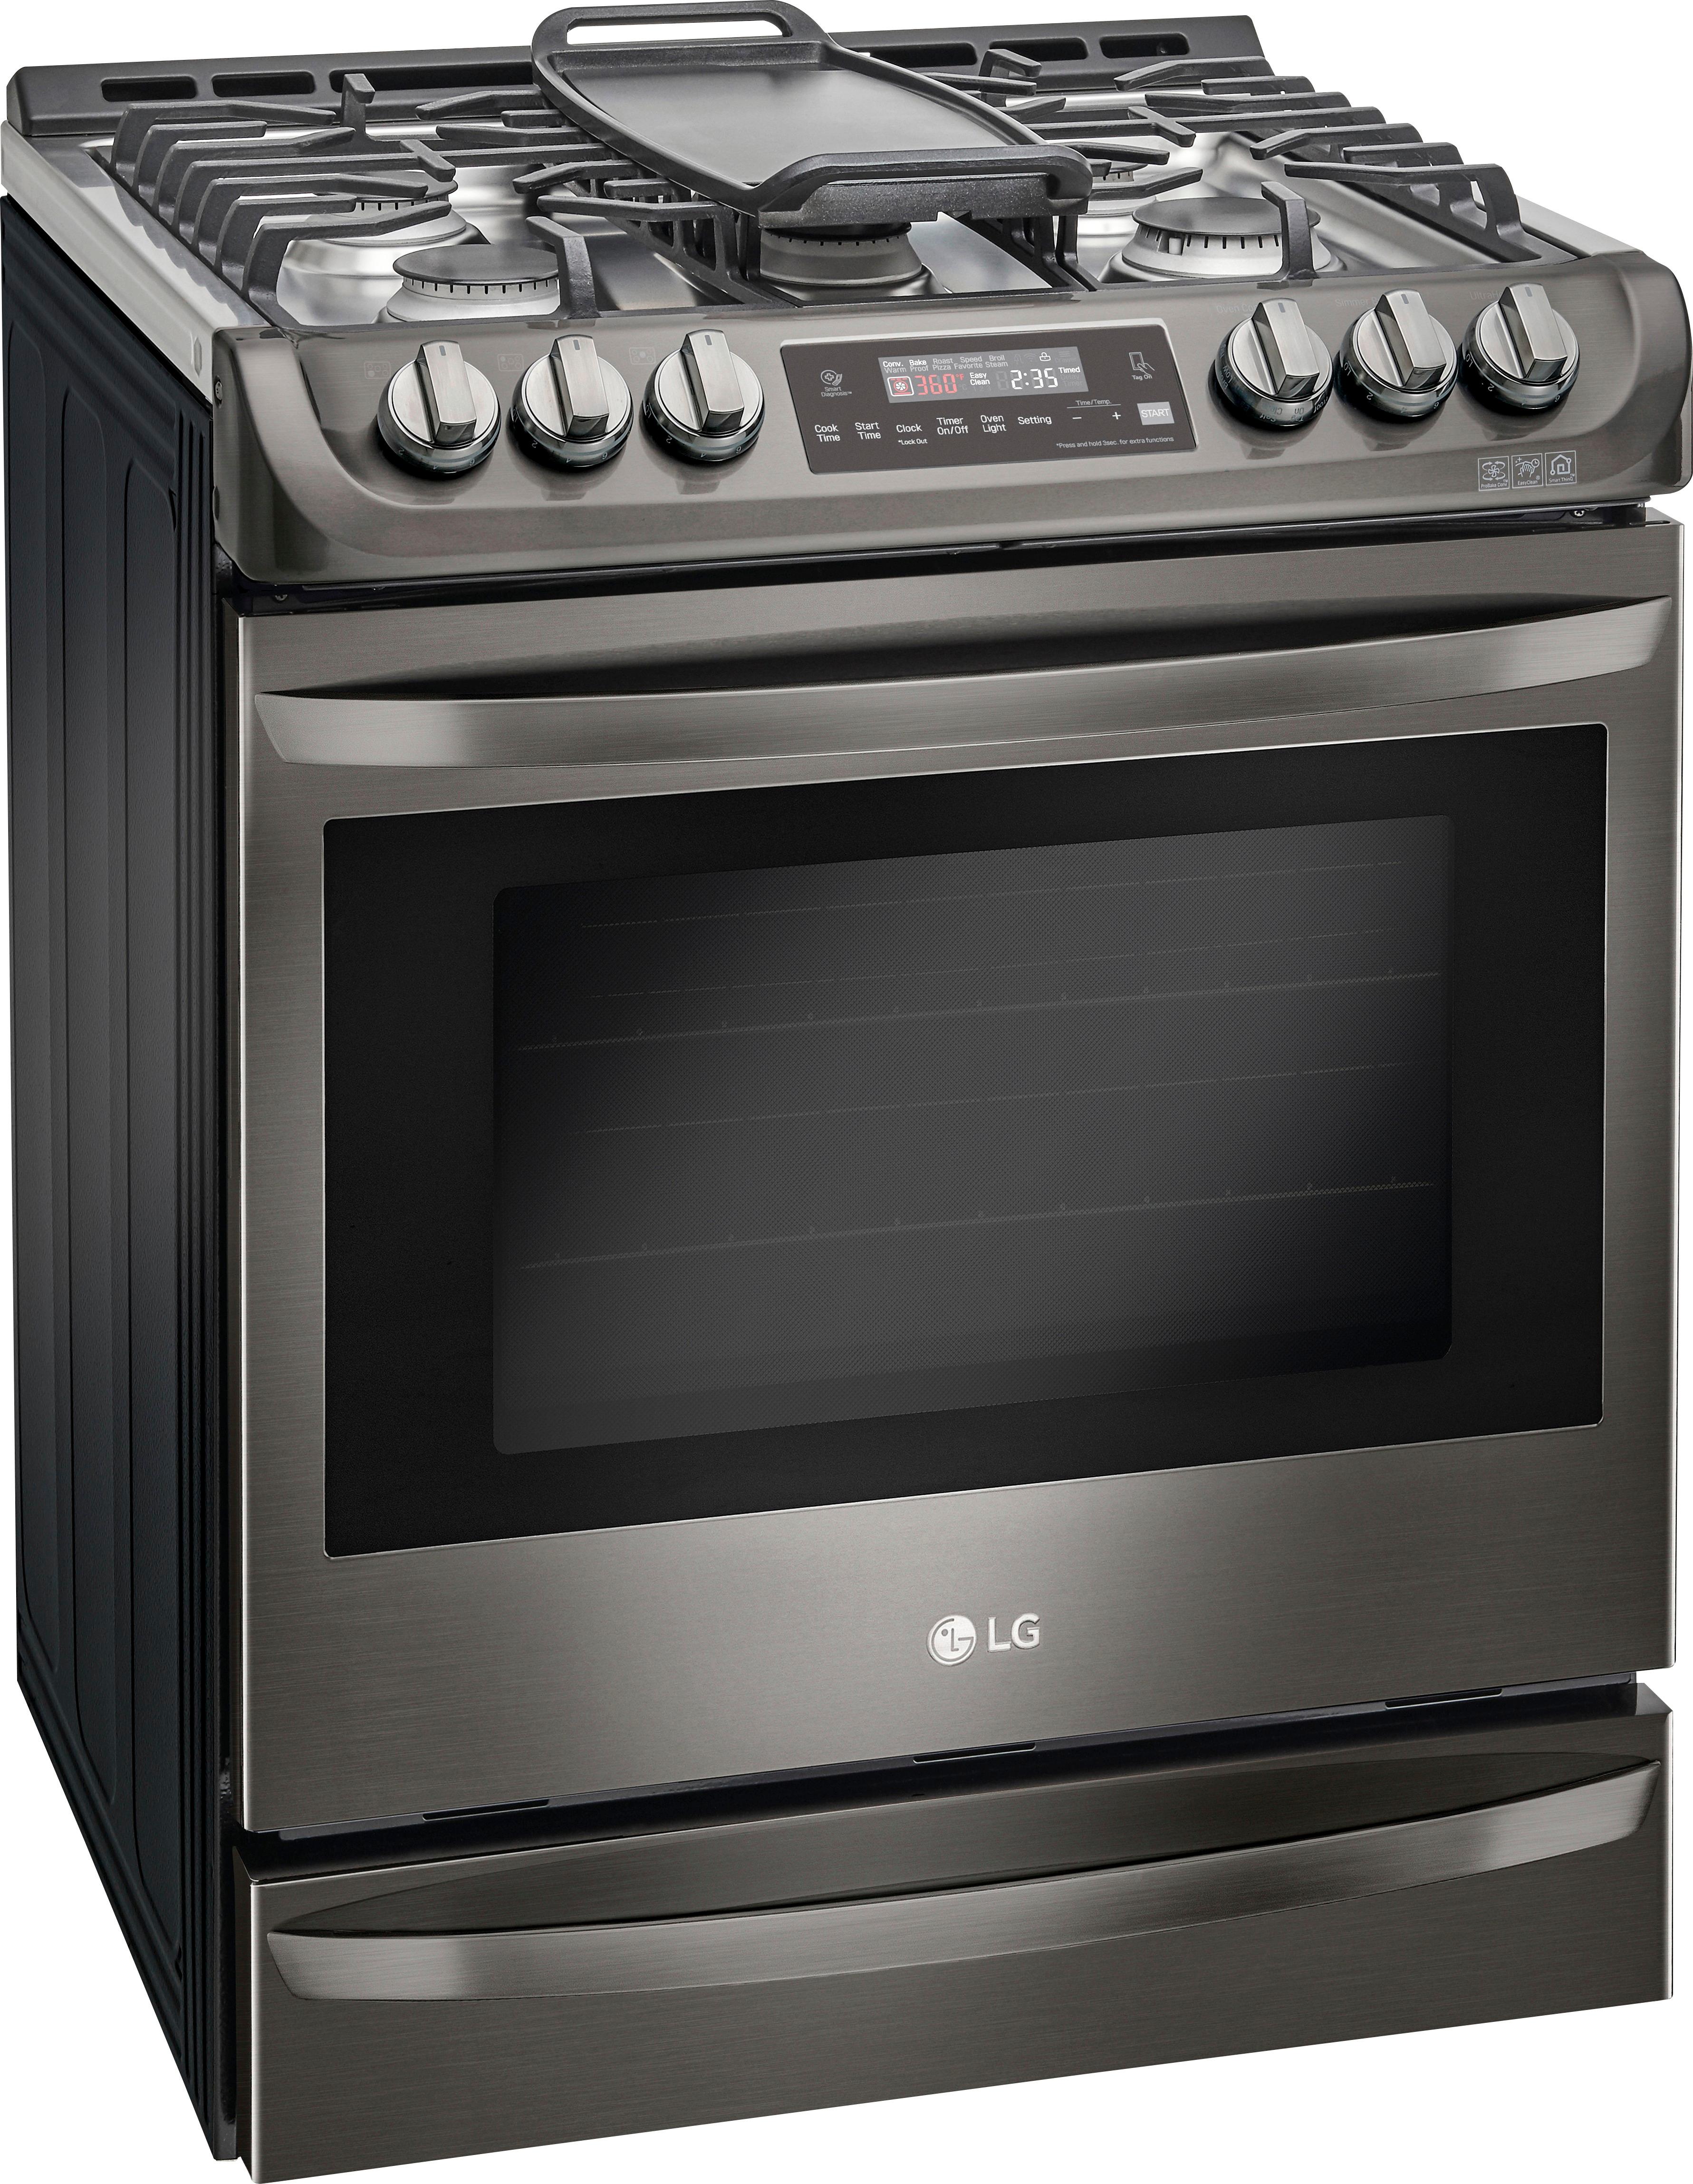 Angle View: GE - 4.8 Cu. Ft. Freestanding Gas Range - Bisque